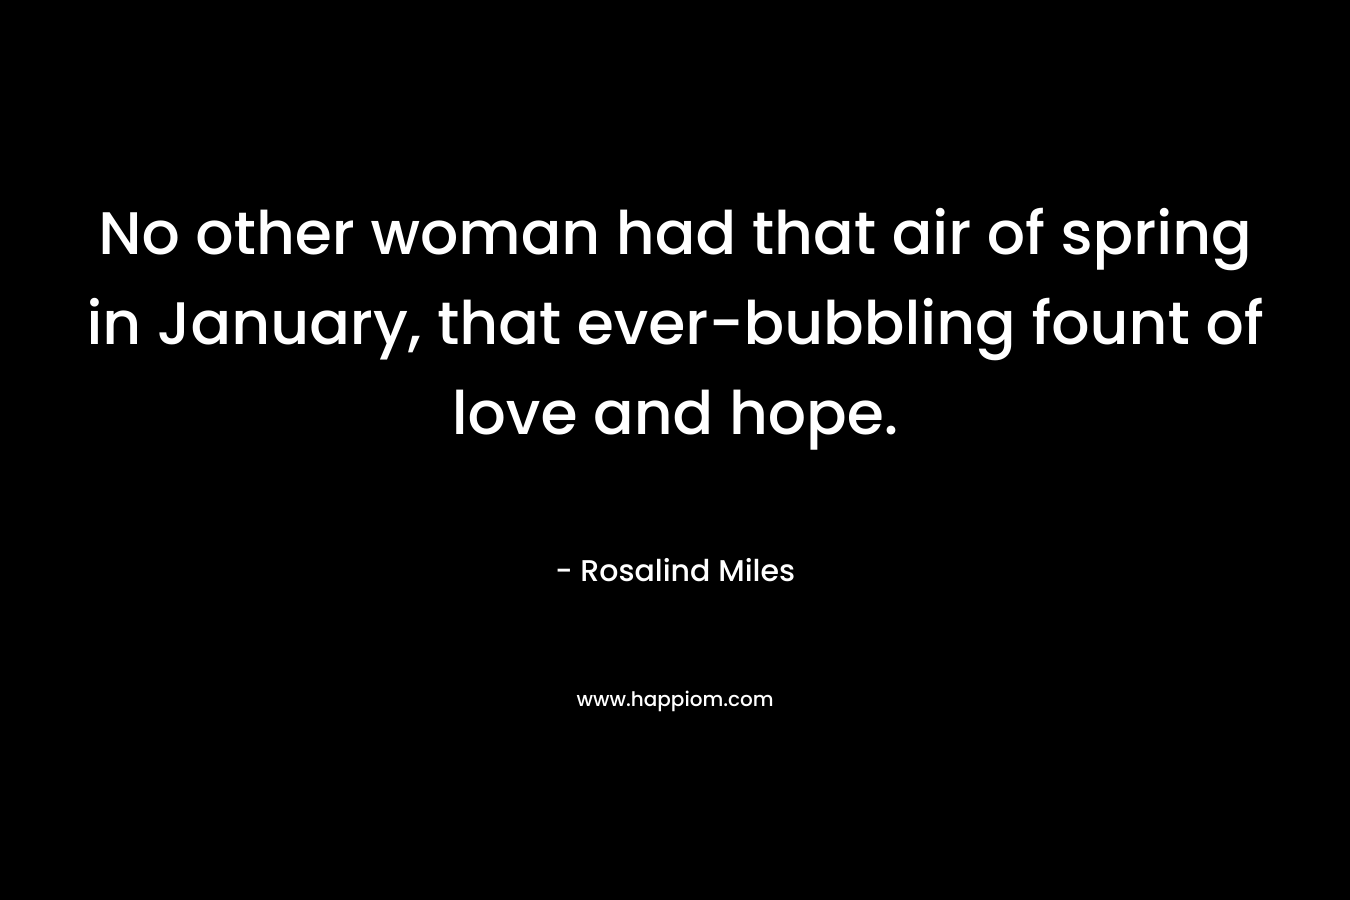 No other woman had that air of spring in January, that ever-bubbling fount of love and hope. – Rosalind Miles